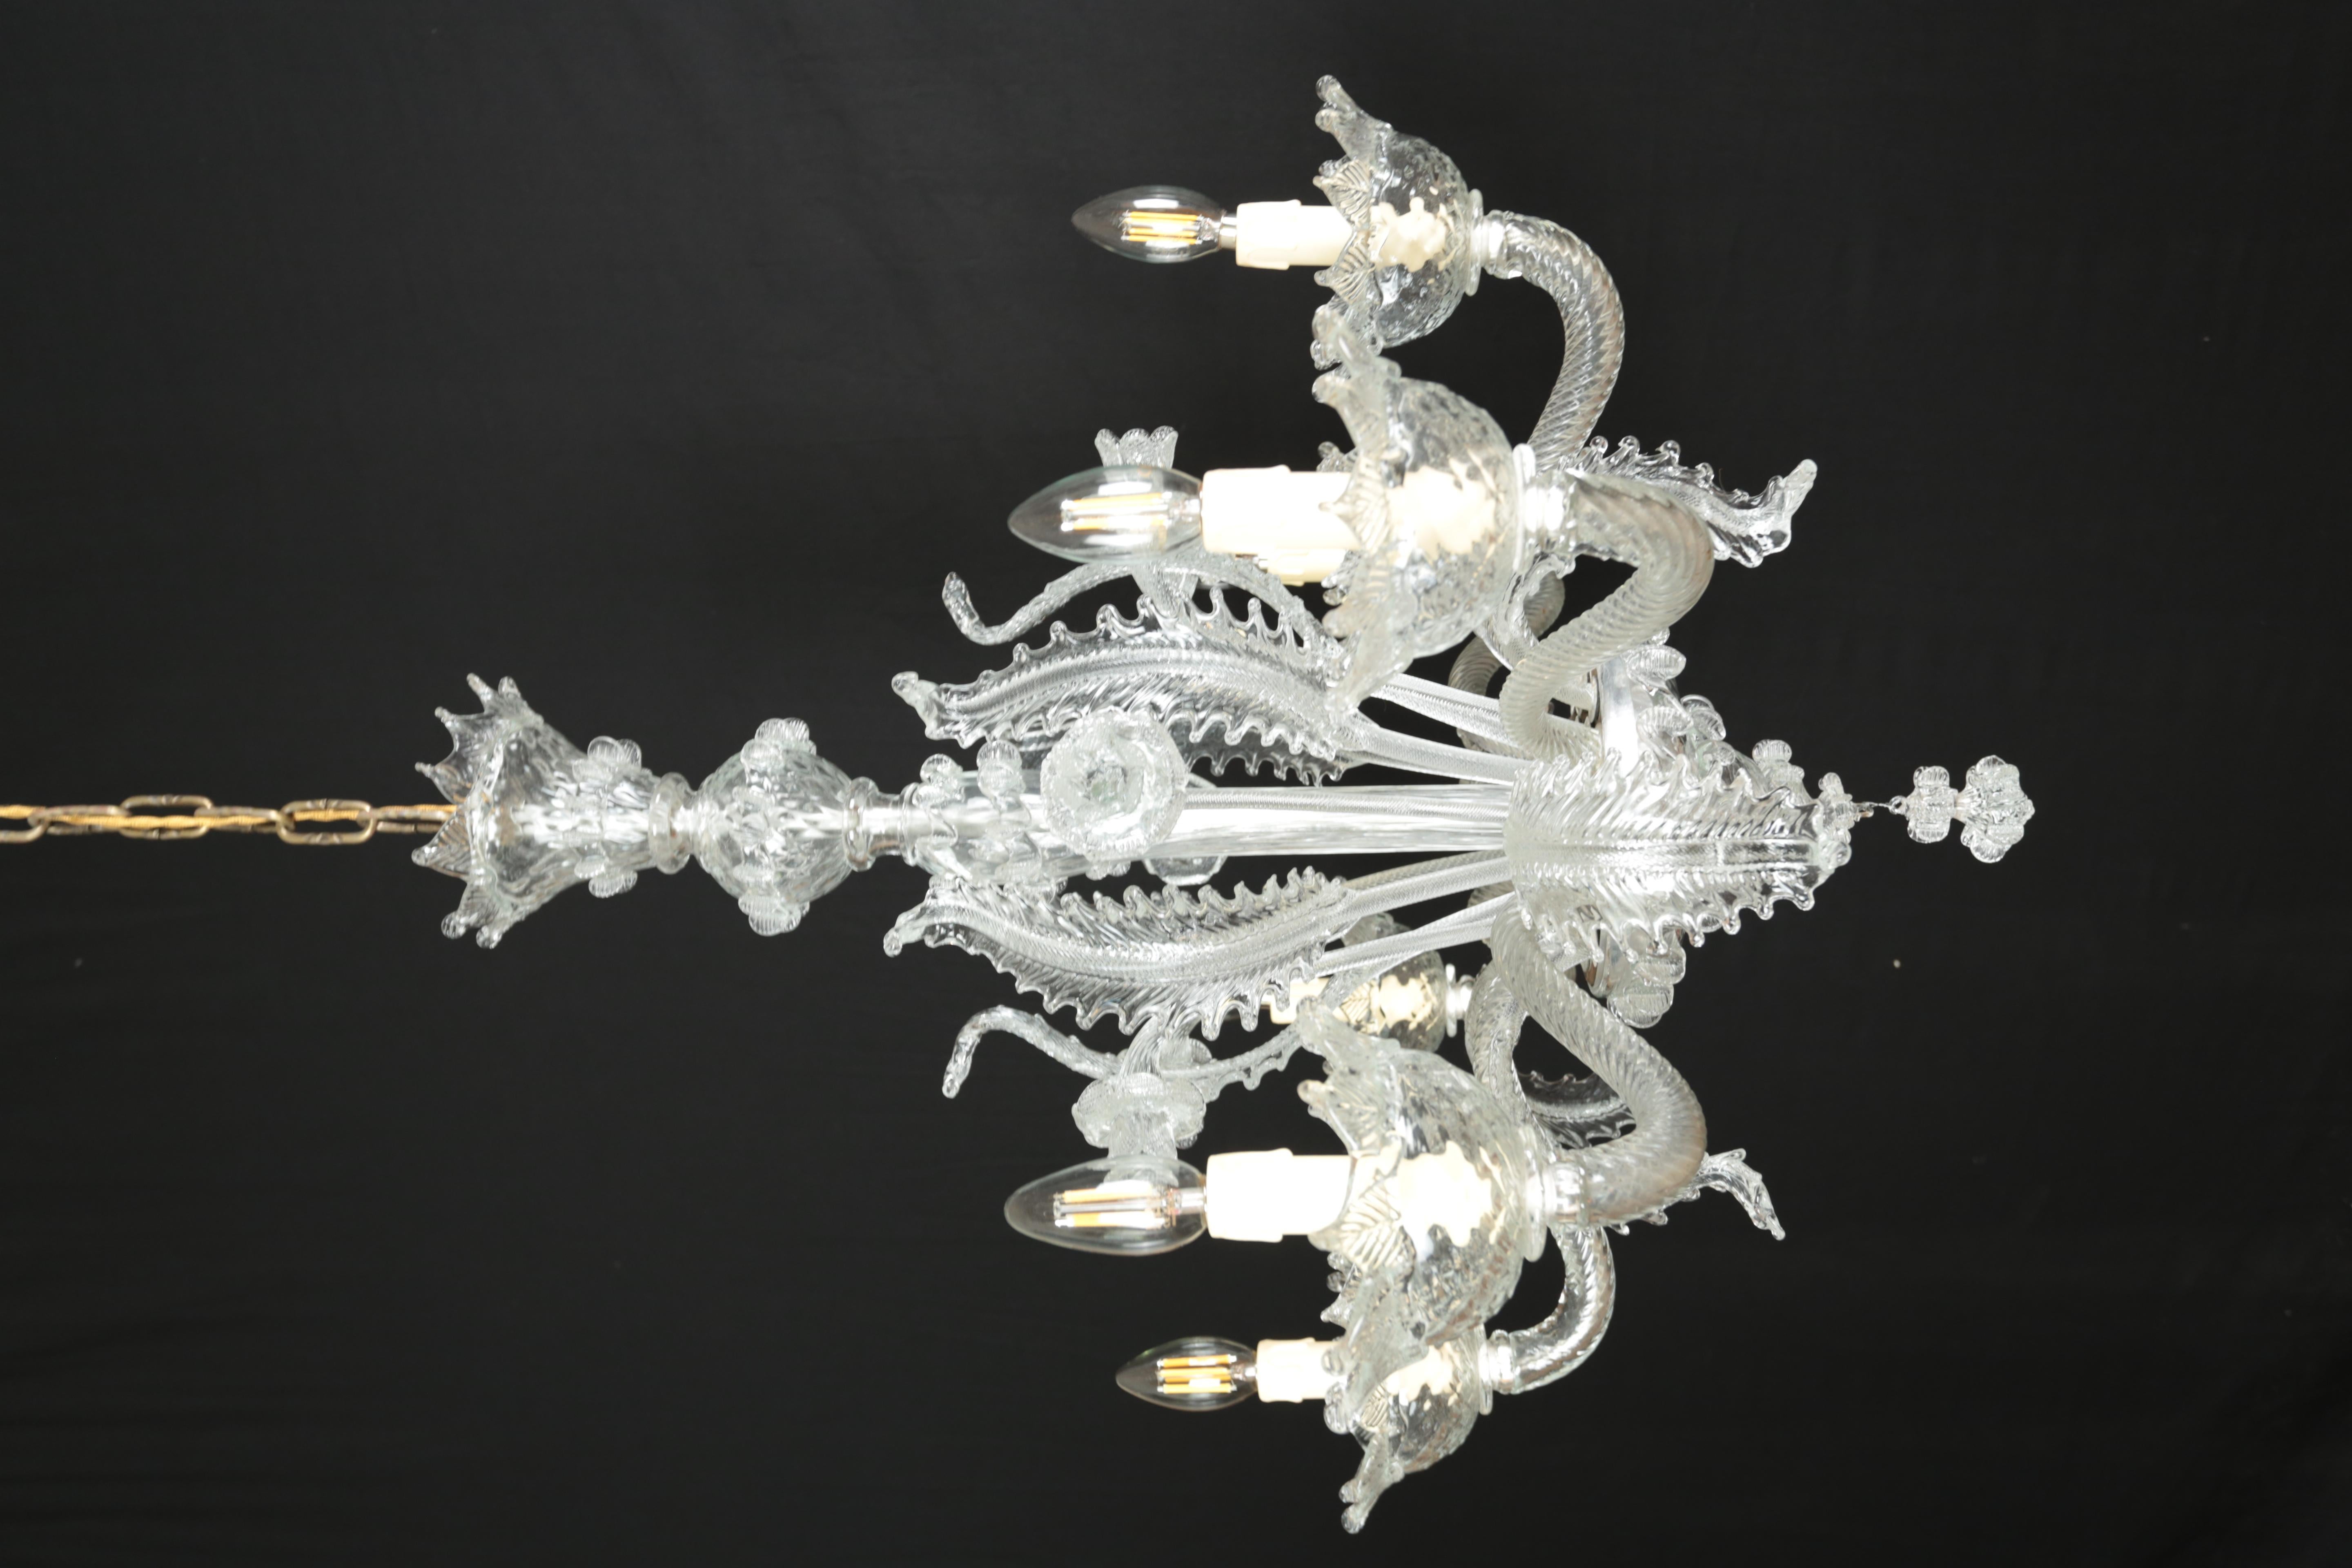 Six-arm Venetian Murano chandelier

A completely restored Venetian chandelier made of split glass. The chandelier is handmade in the Murano manufactory. Six-arm design with flowers and leaves. This beautiful chandelier has undergone a complete